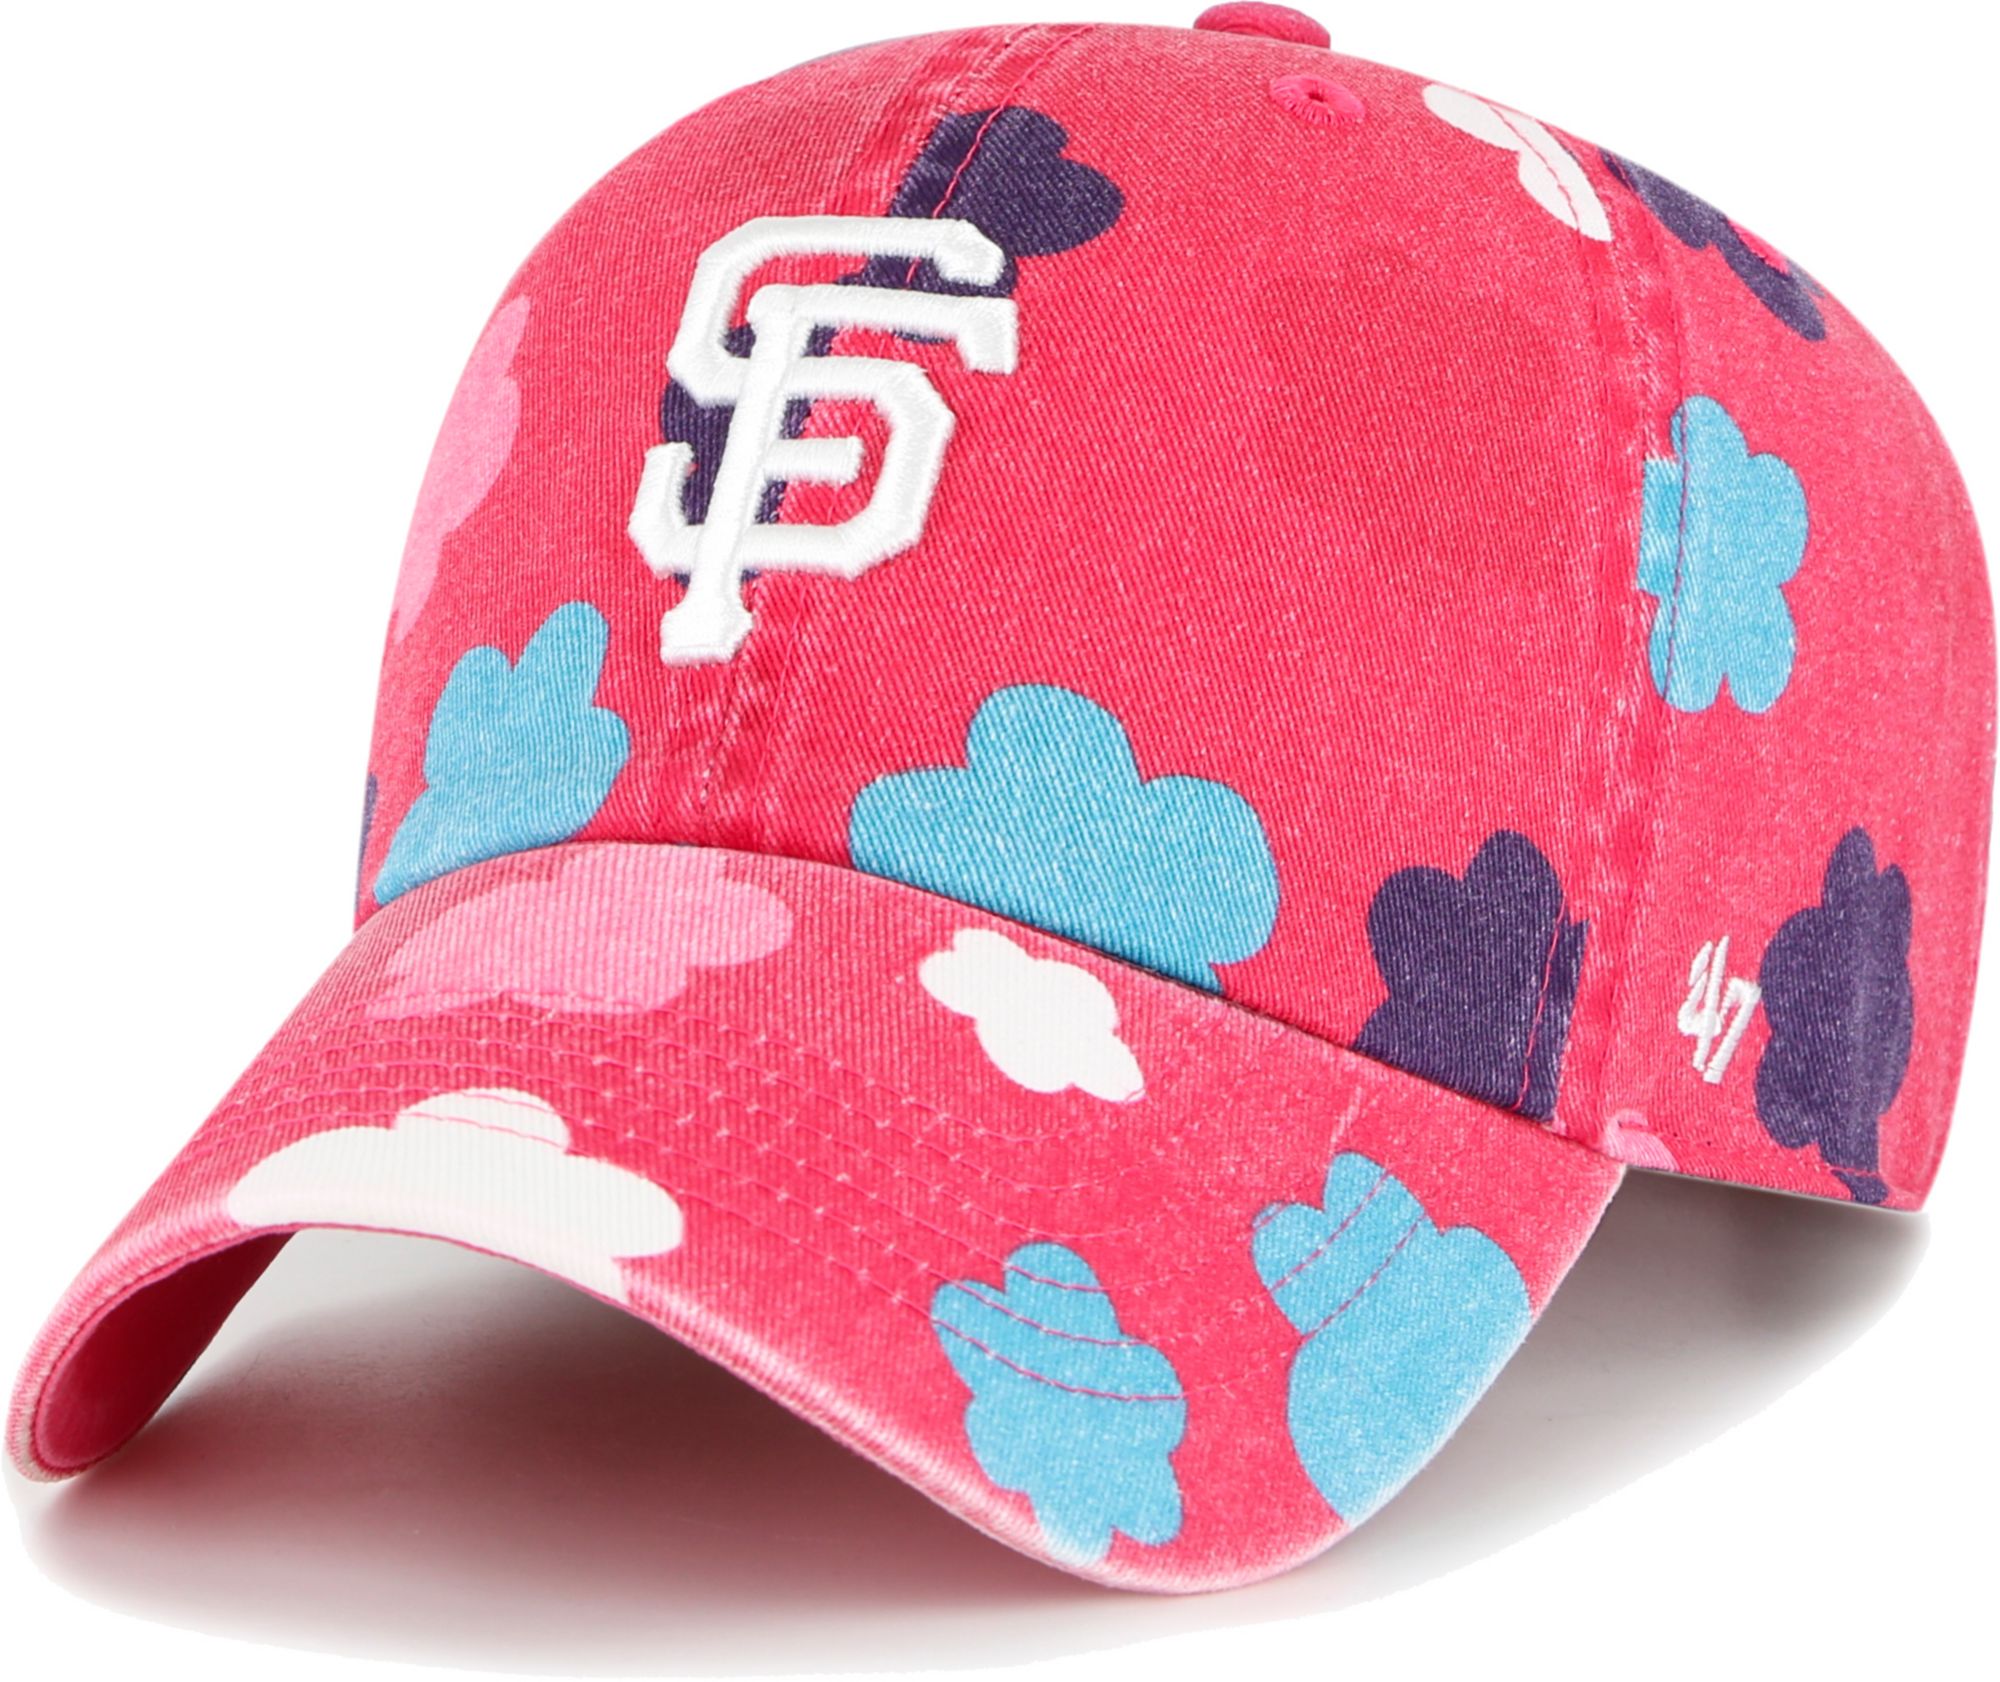  San Francisco Giants Rose Pink Clean Up Adjustable Hat, Adult  One Size Fits All : Sports & Outdoors